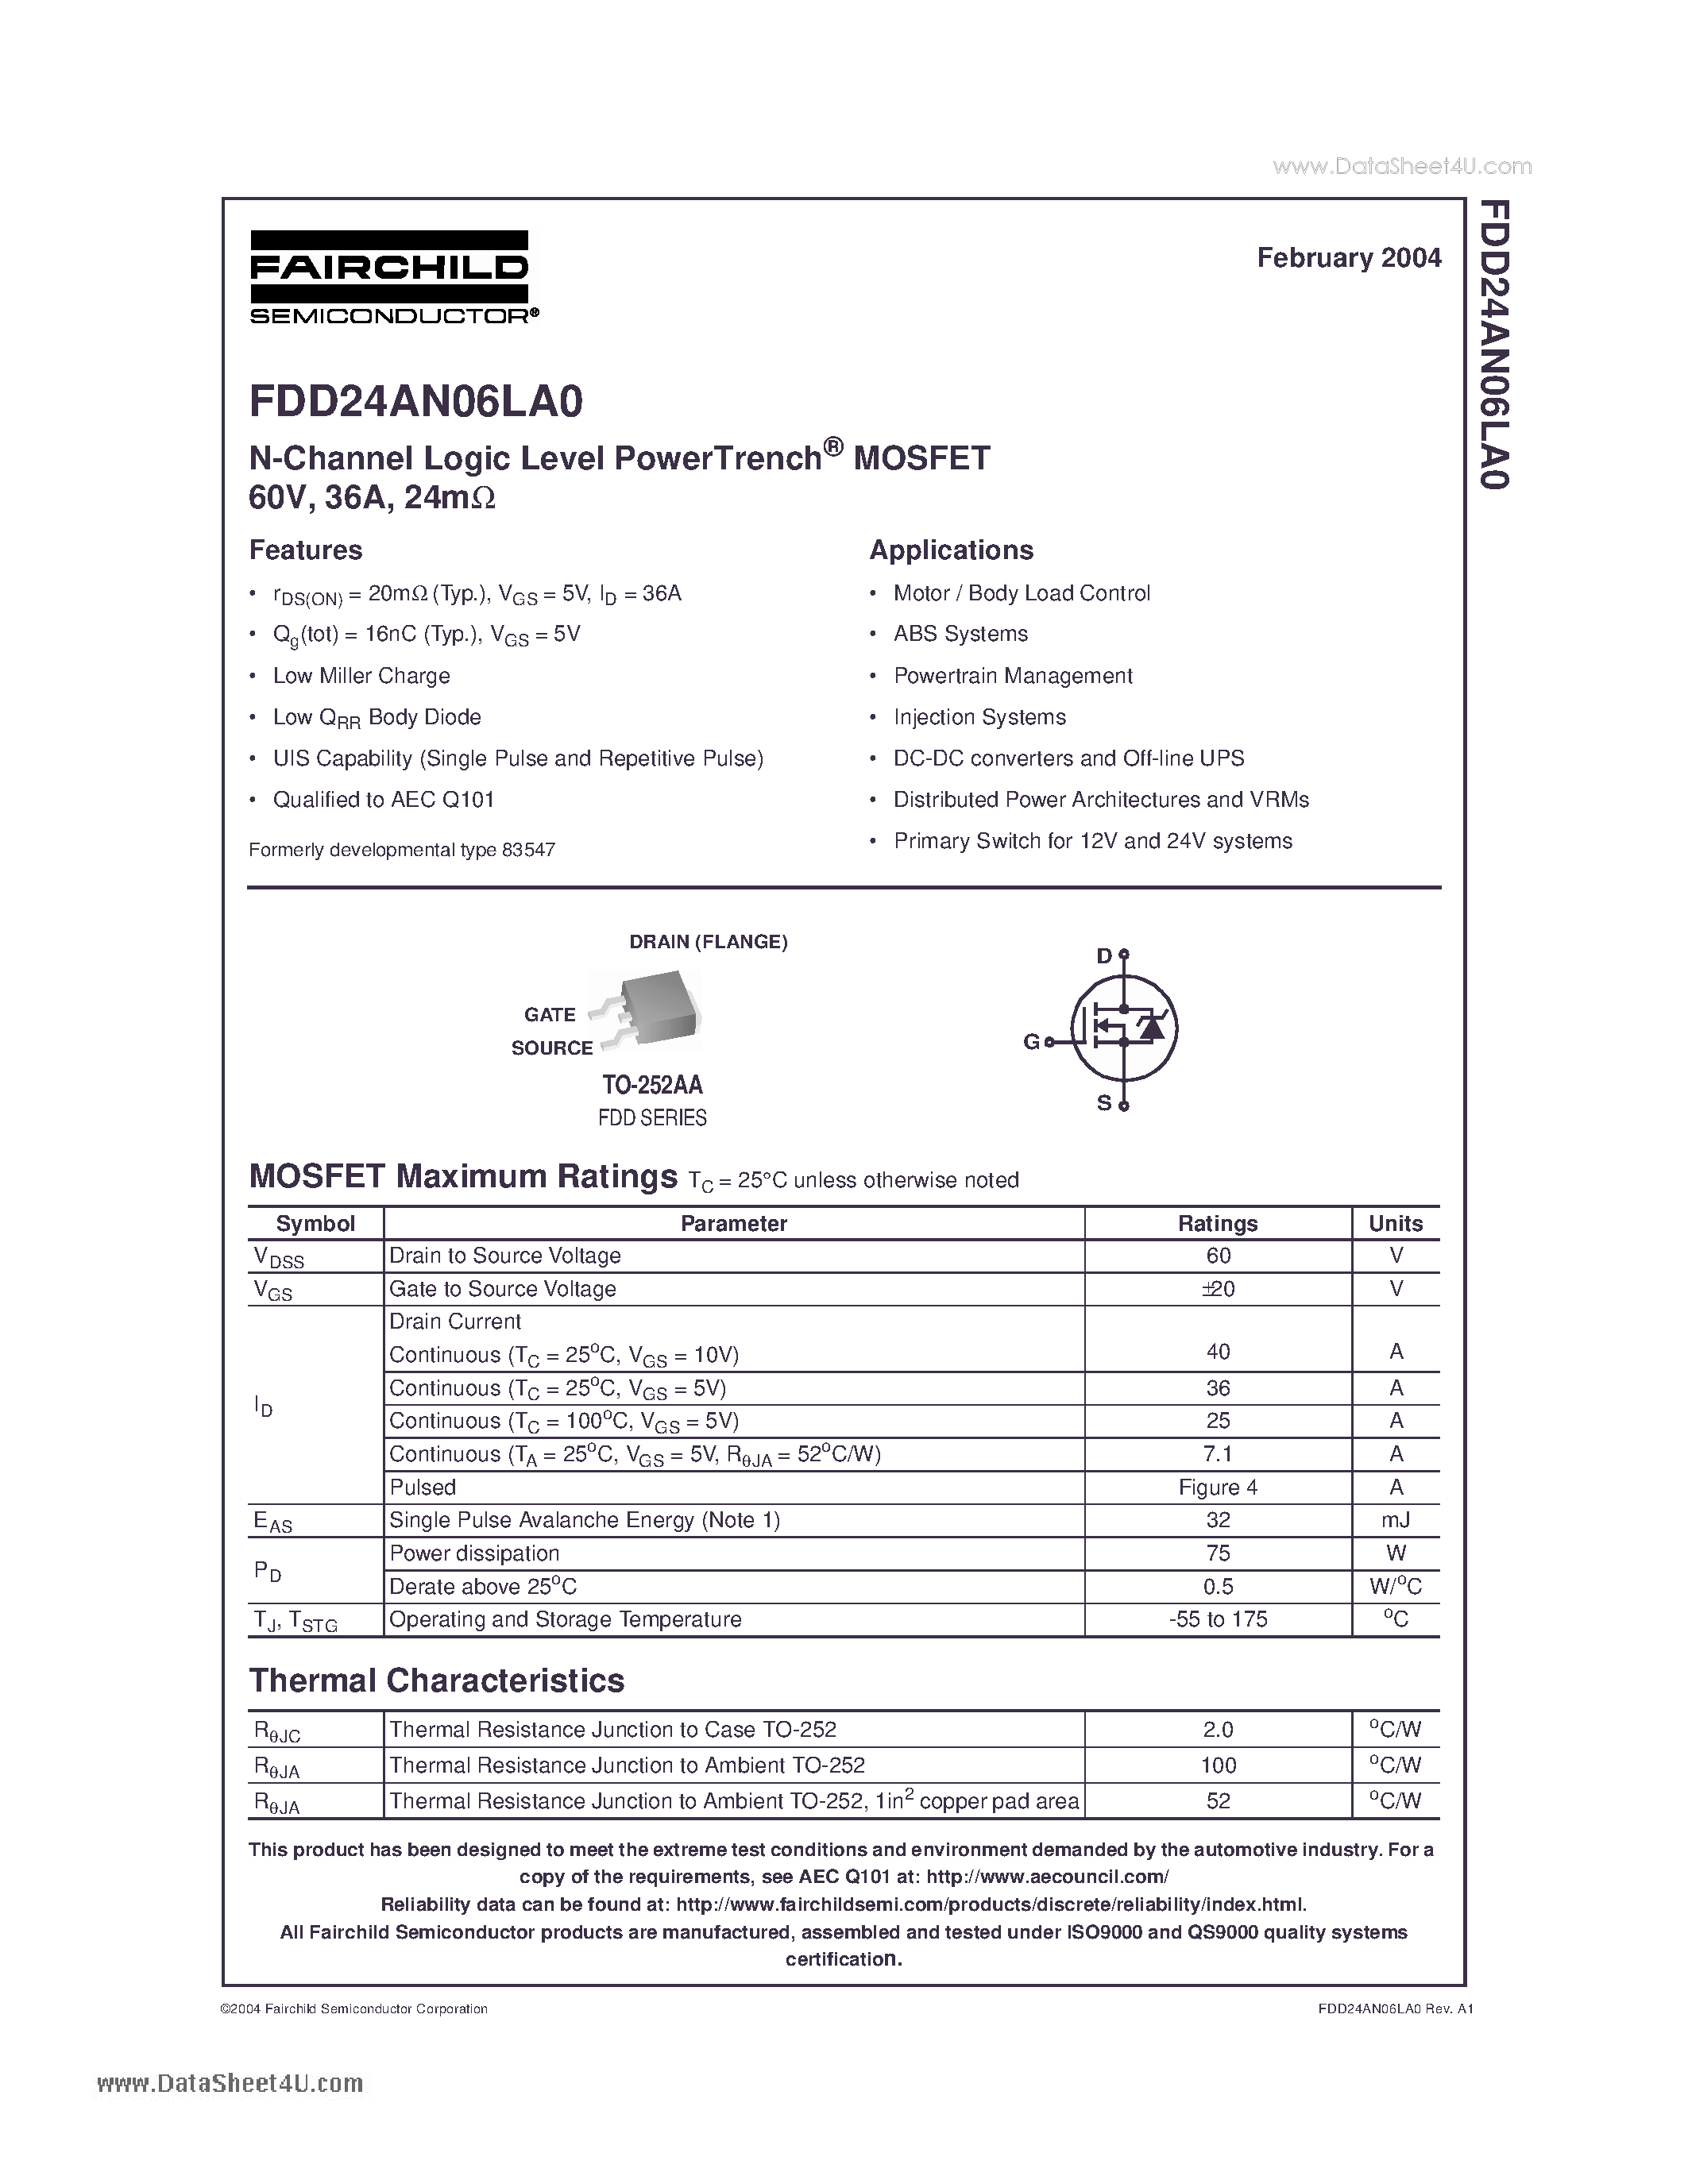 Datasheet FDD24AN06LA0 - N CHANNEL LOGIC LEVEL POWER TRENCH MOSFET page 1